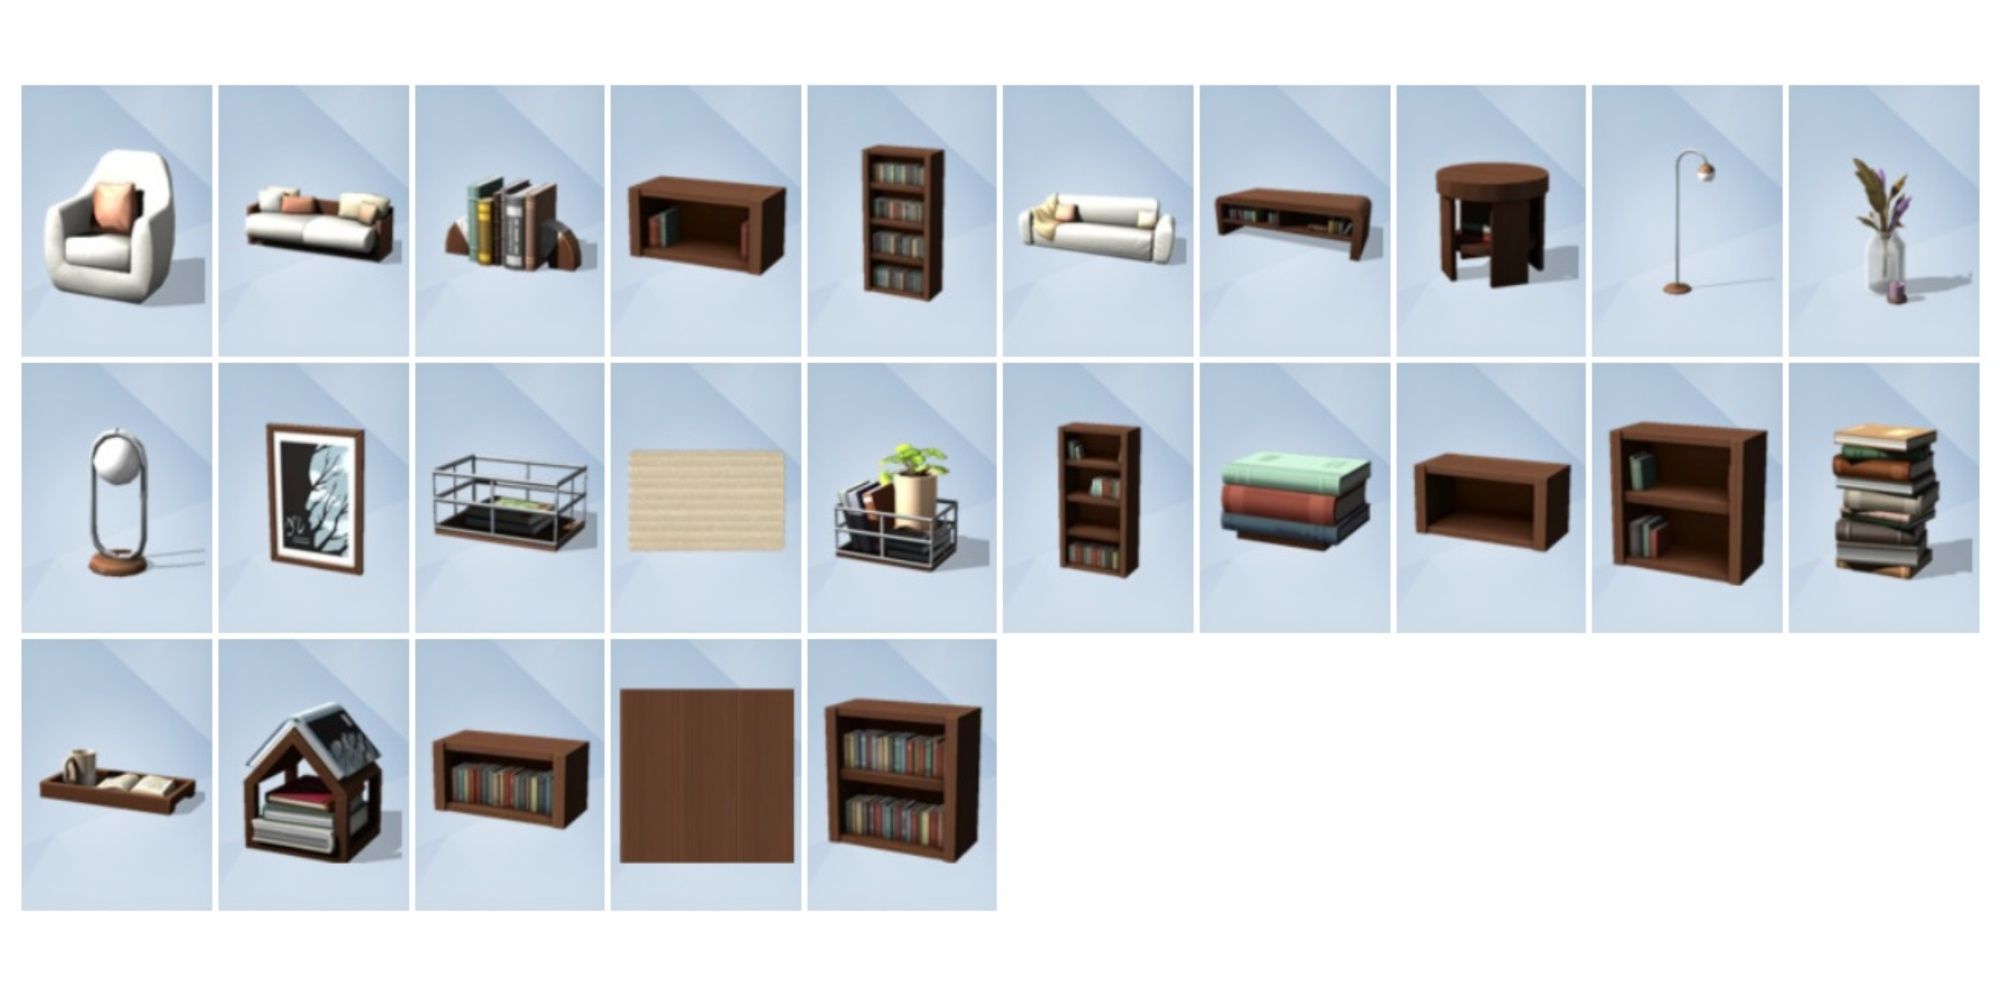 build mode items included with the book nook sims 4 kit